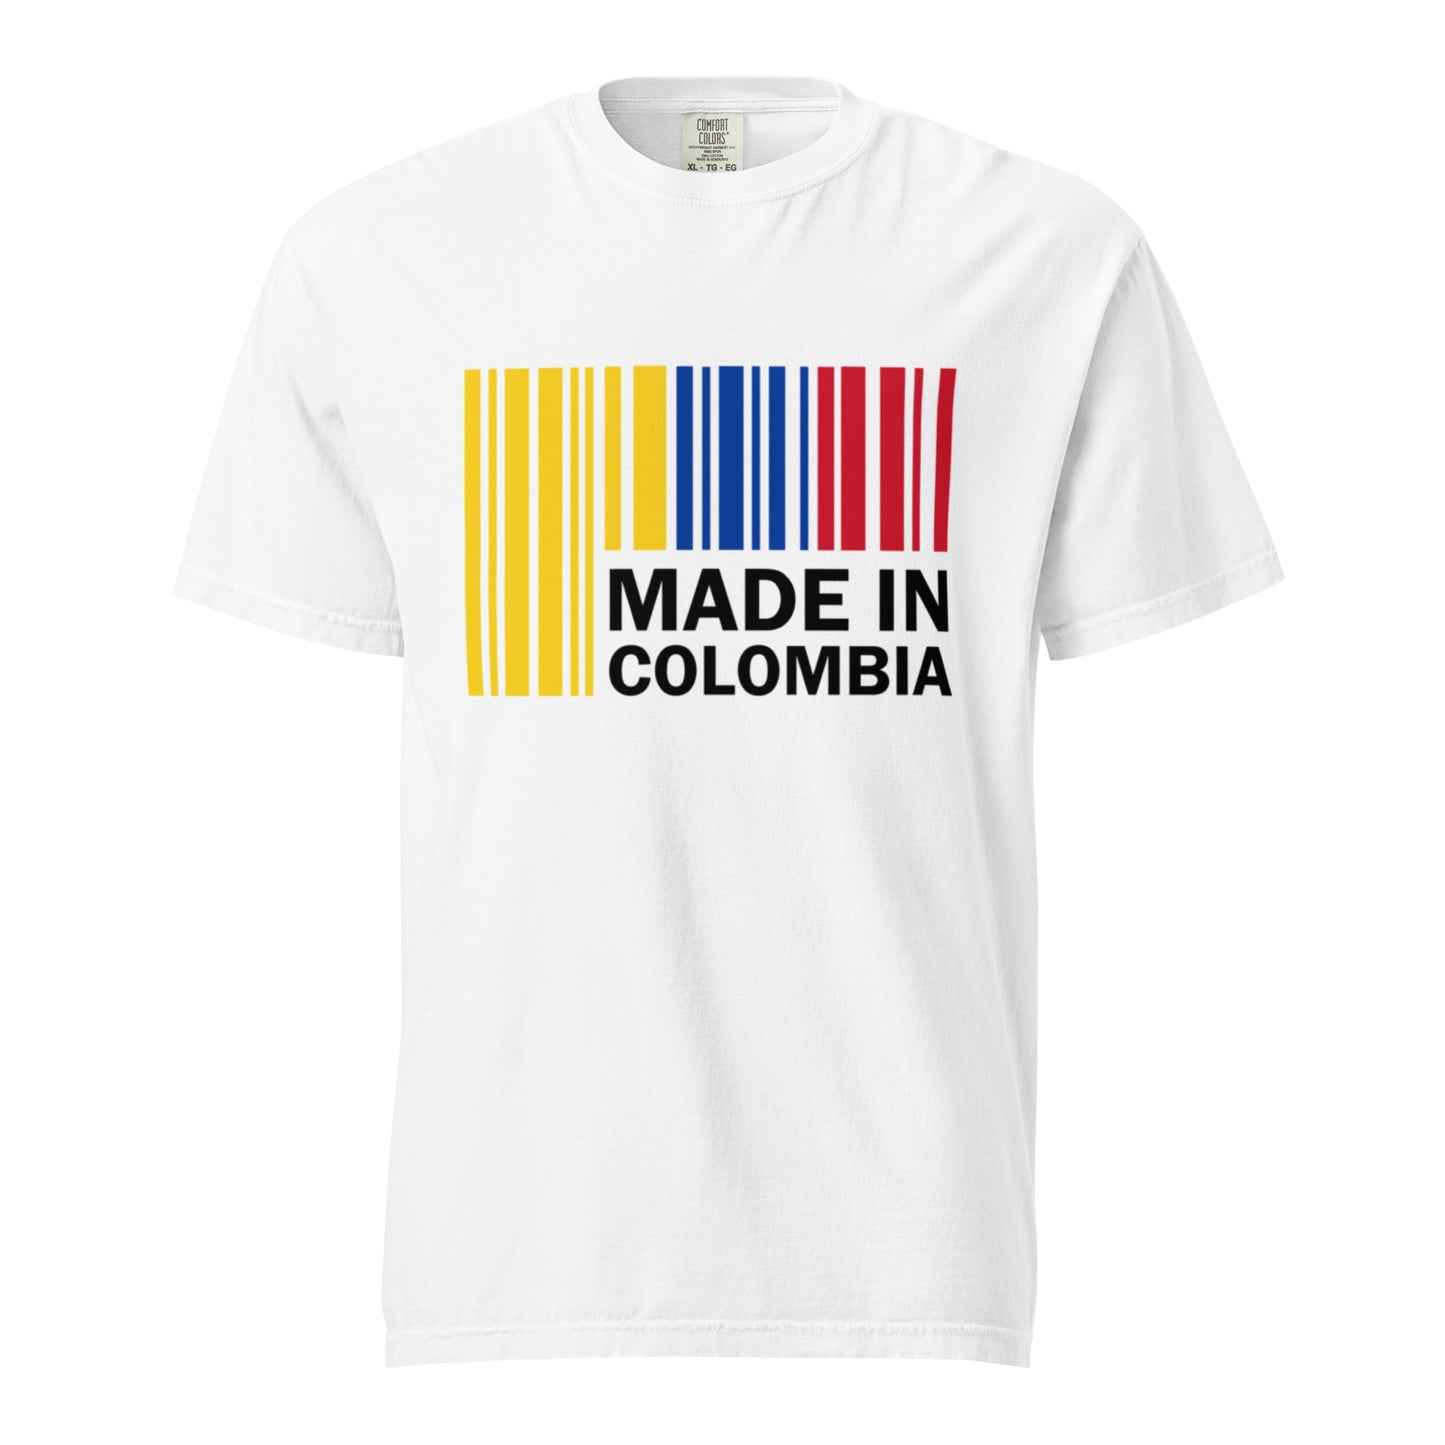 Made in Colombia Shirt